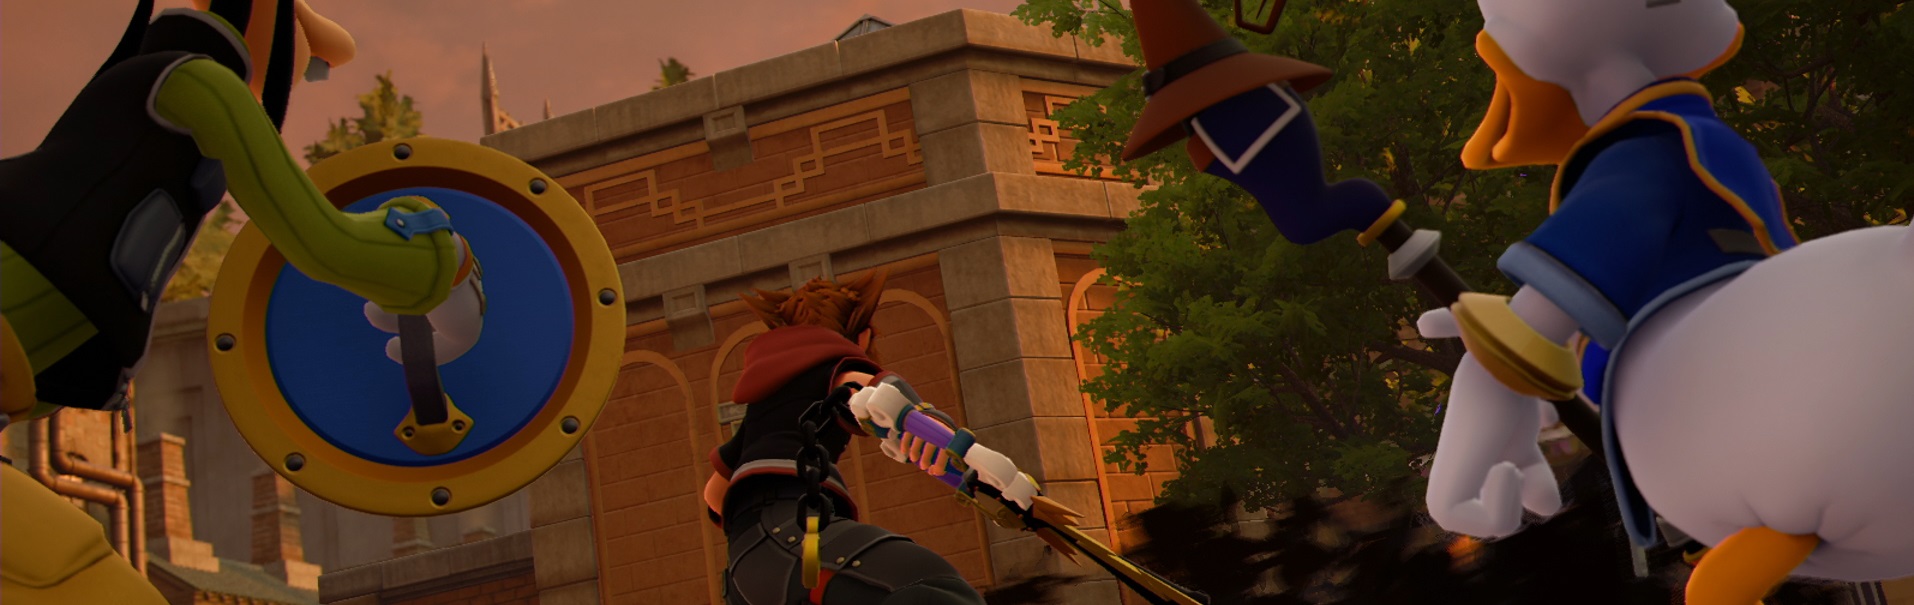 [KH3] How to get in to kingdom hearts for KH3? : KingdomHearts